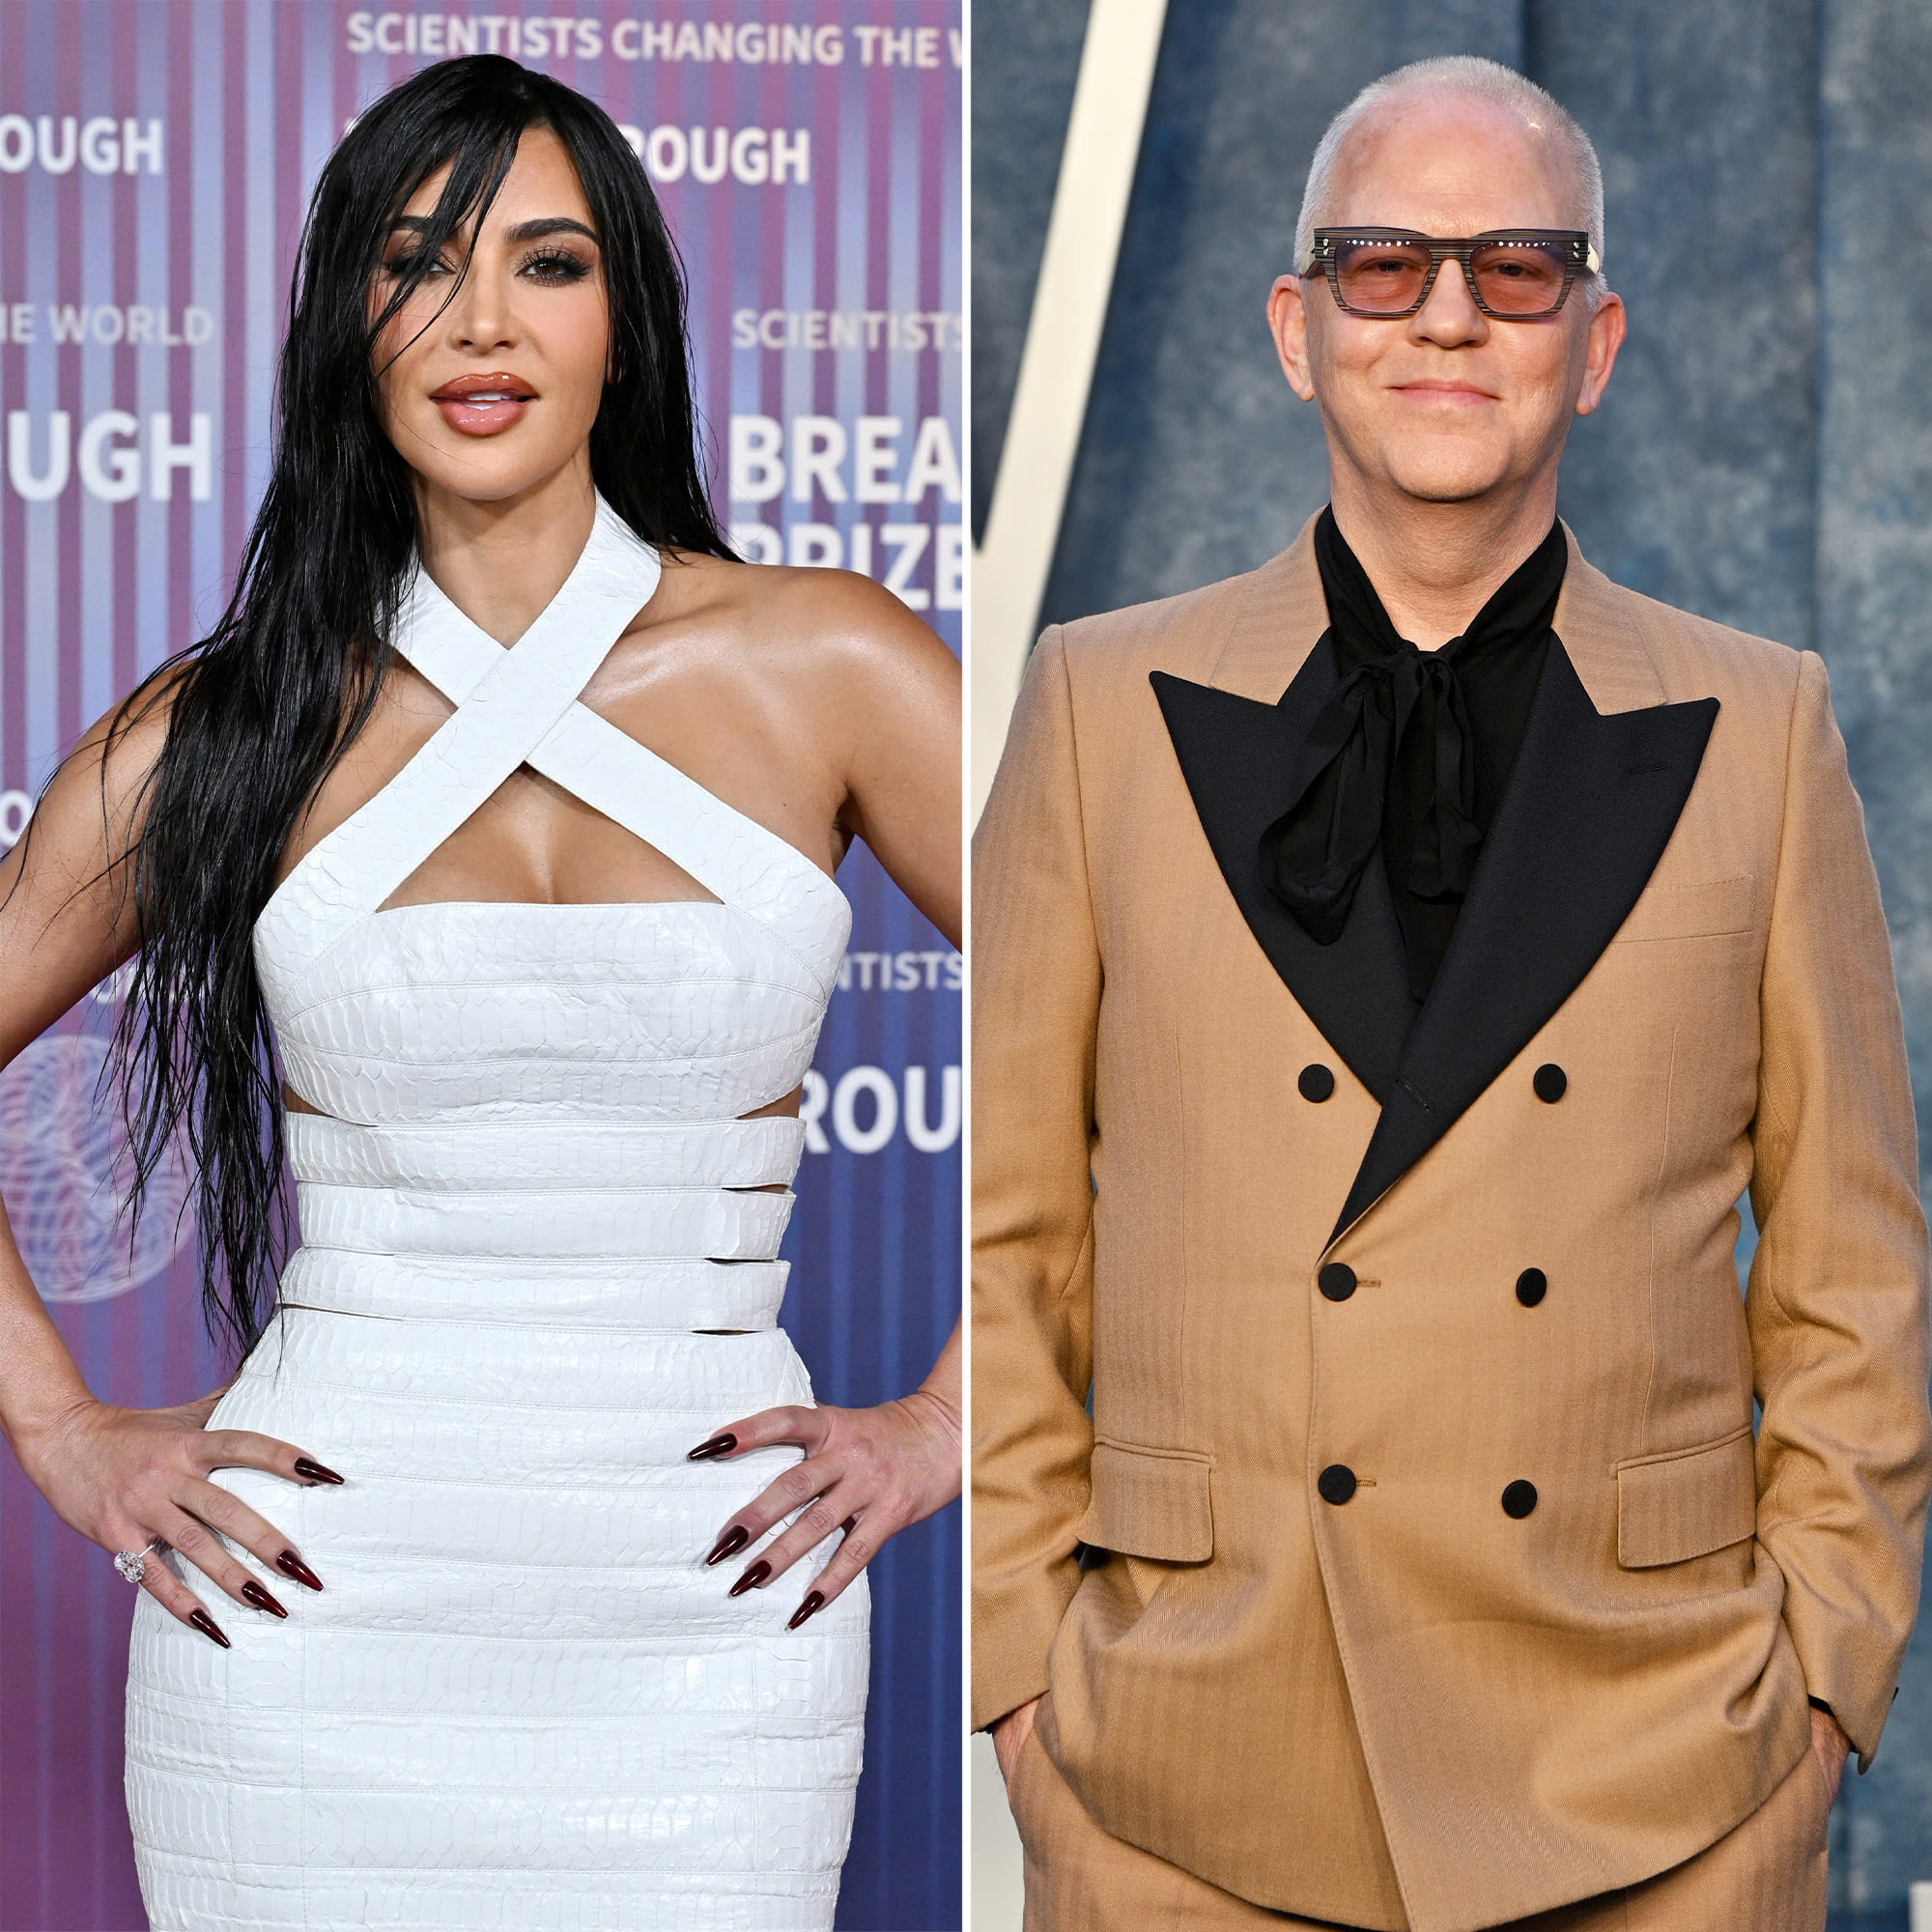 Kim Kardashian Asked Ryan Murphy Who His ‘Sources’ Were for ‘The People v. OJ’: ‘It Was Done So Well’